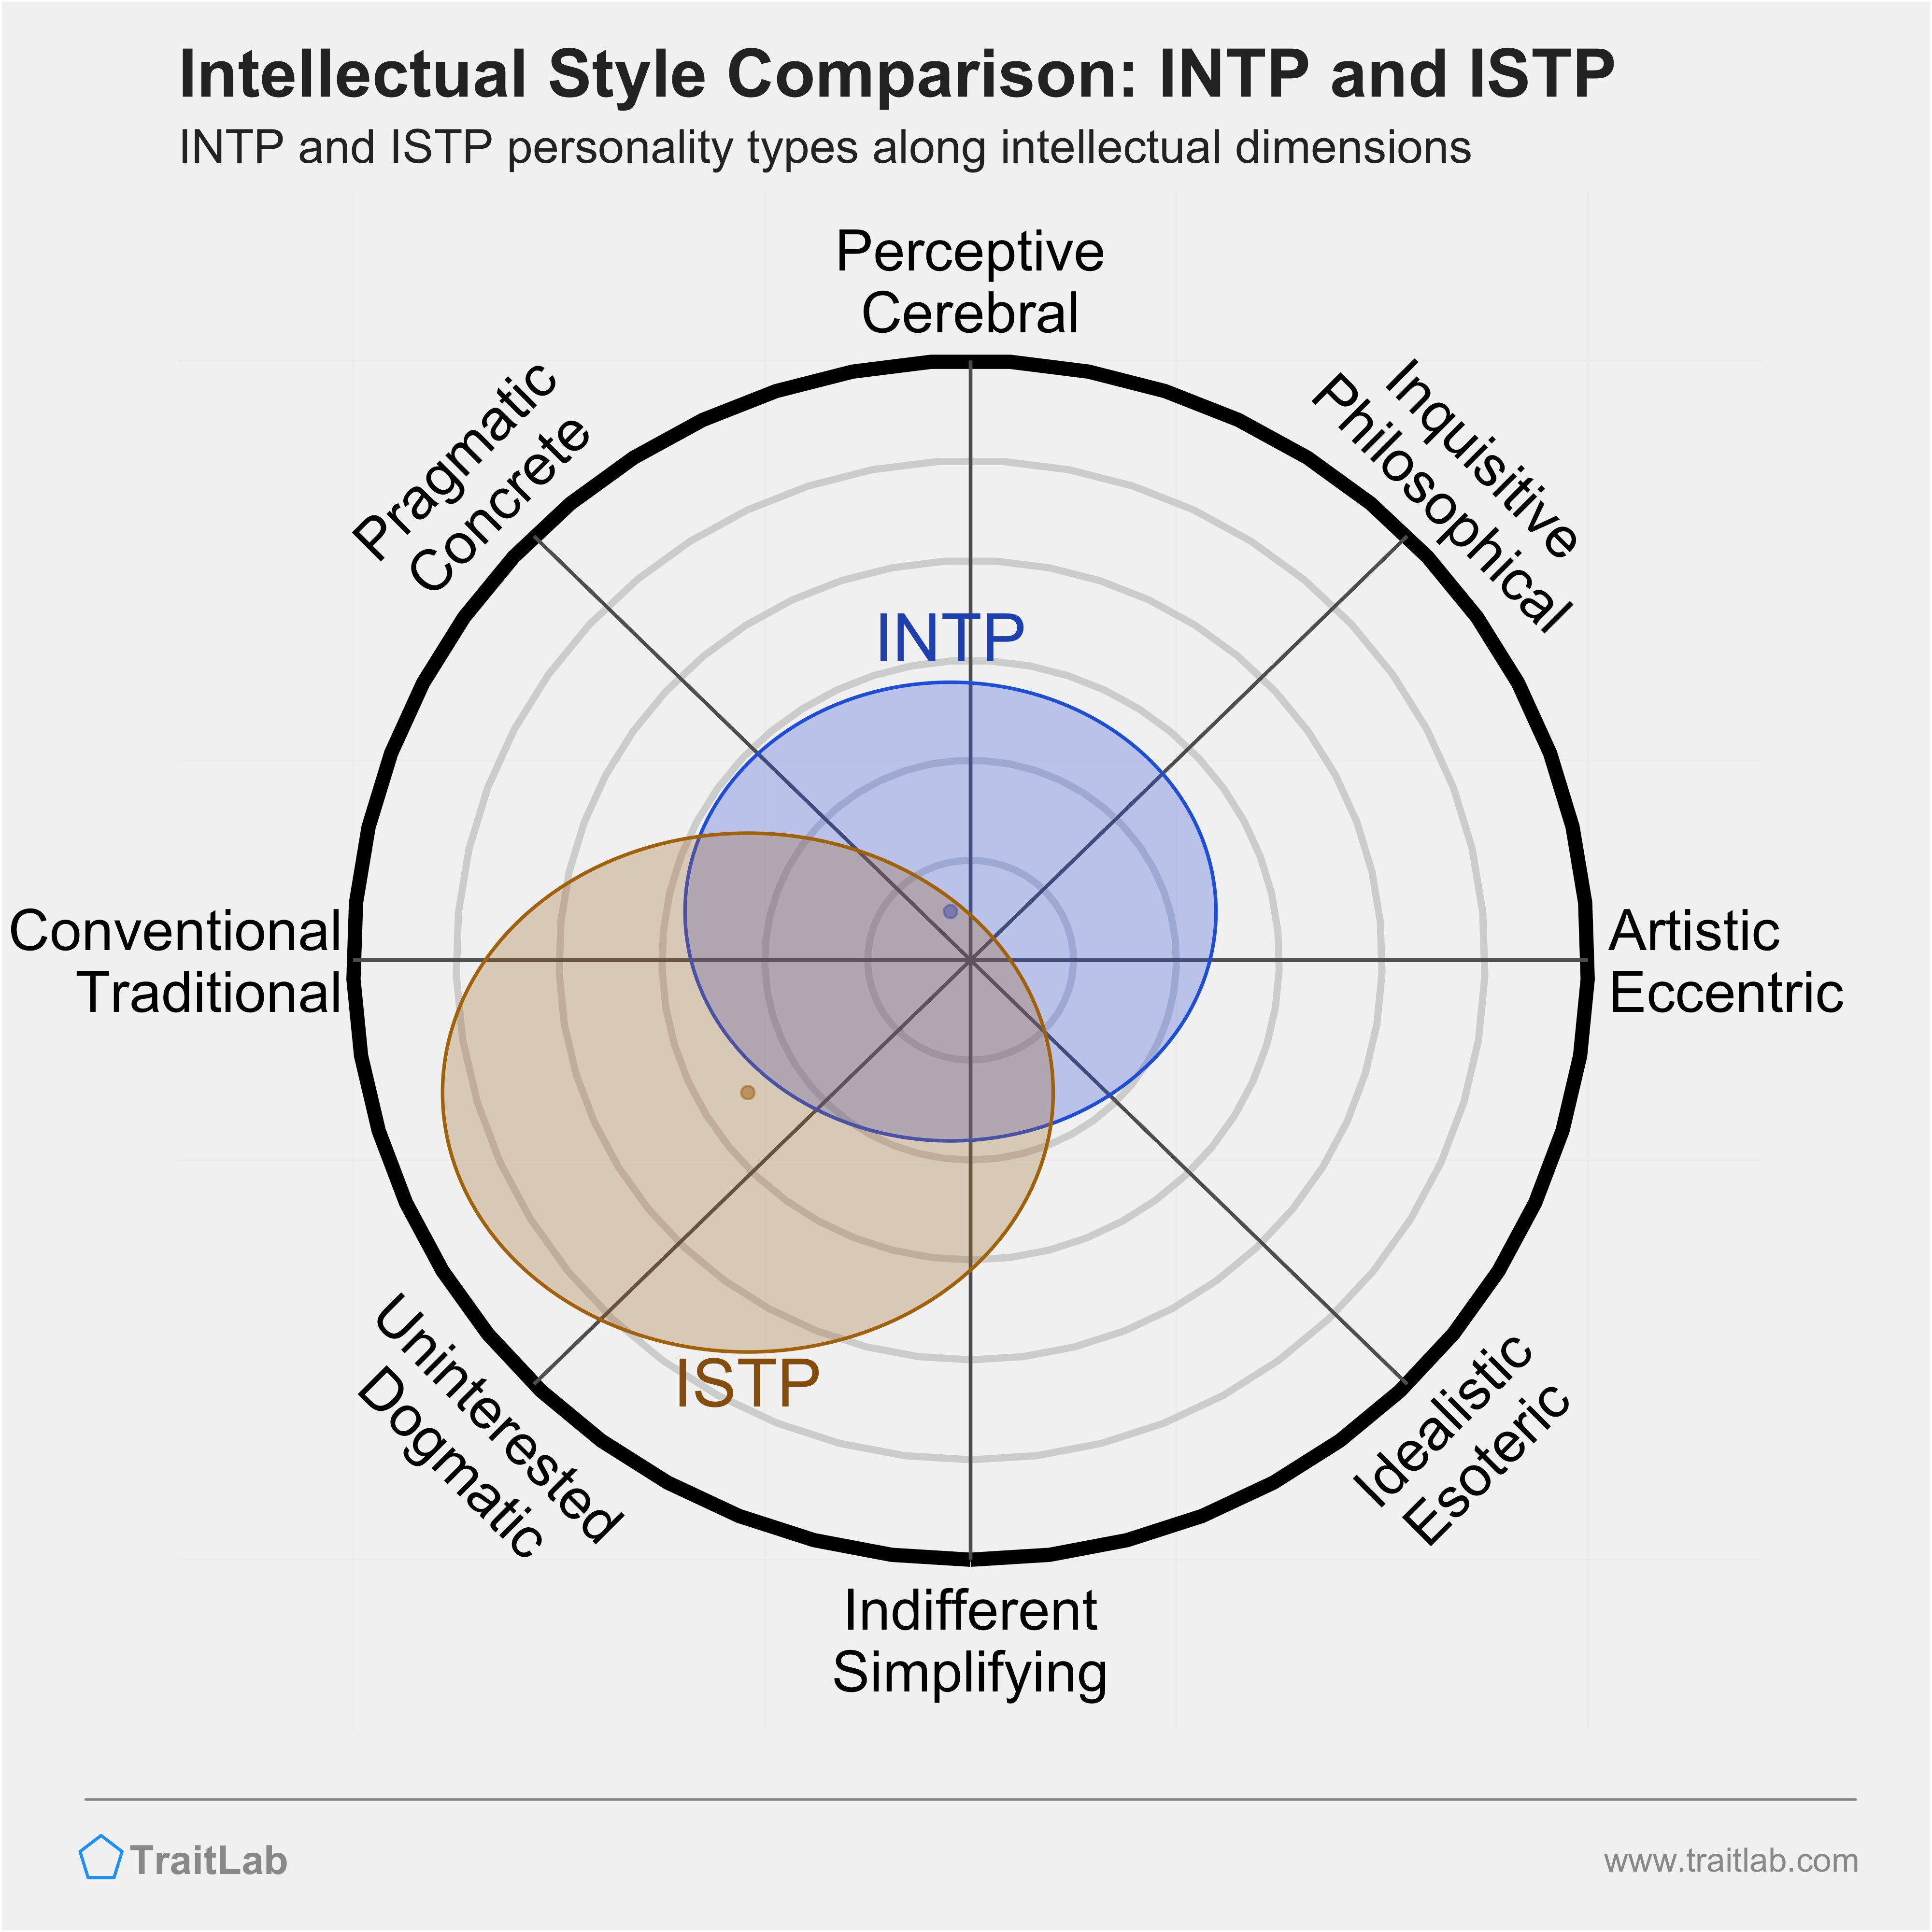 INTP and ISTP comparison across intellectual dimensions